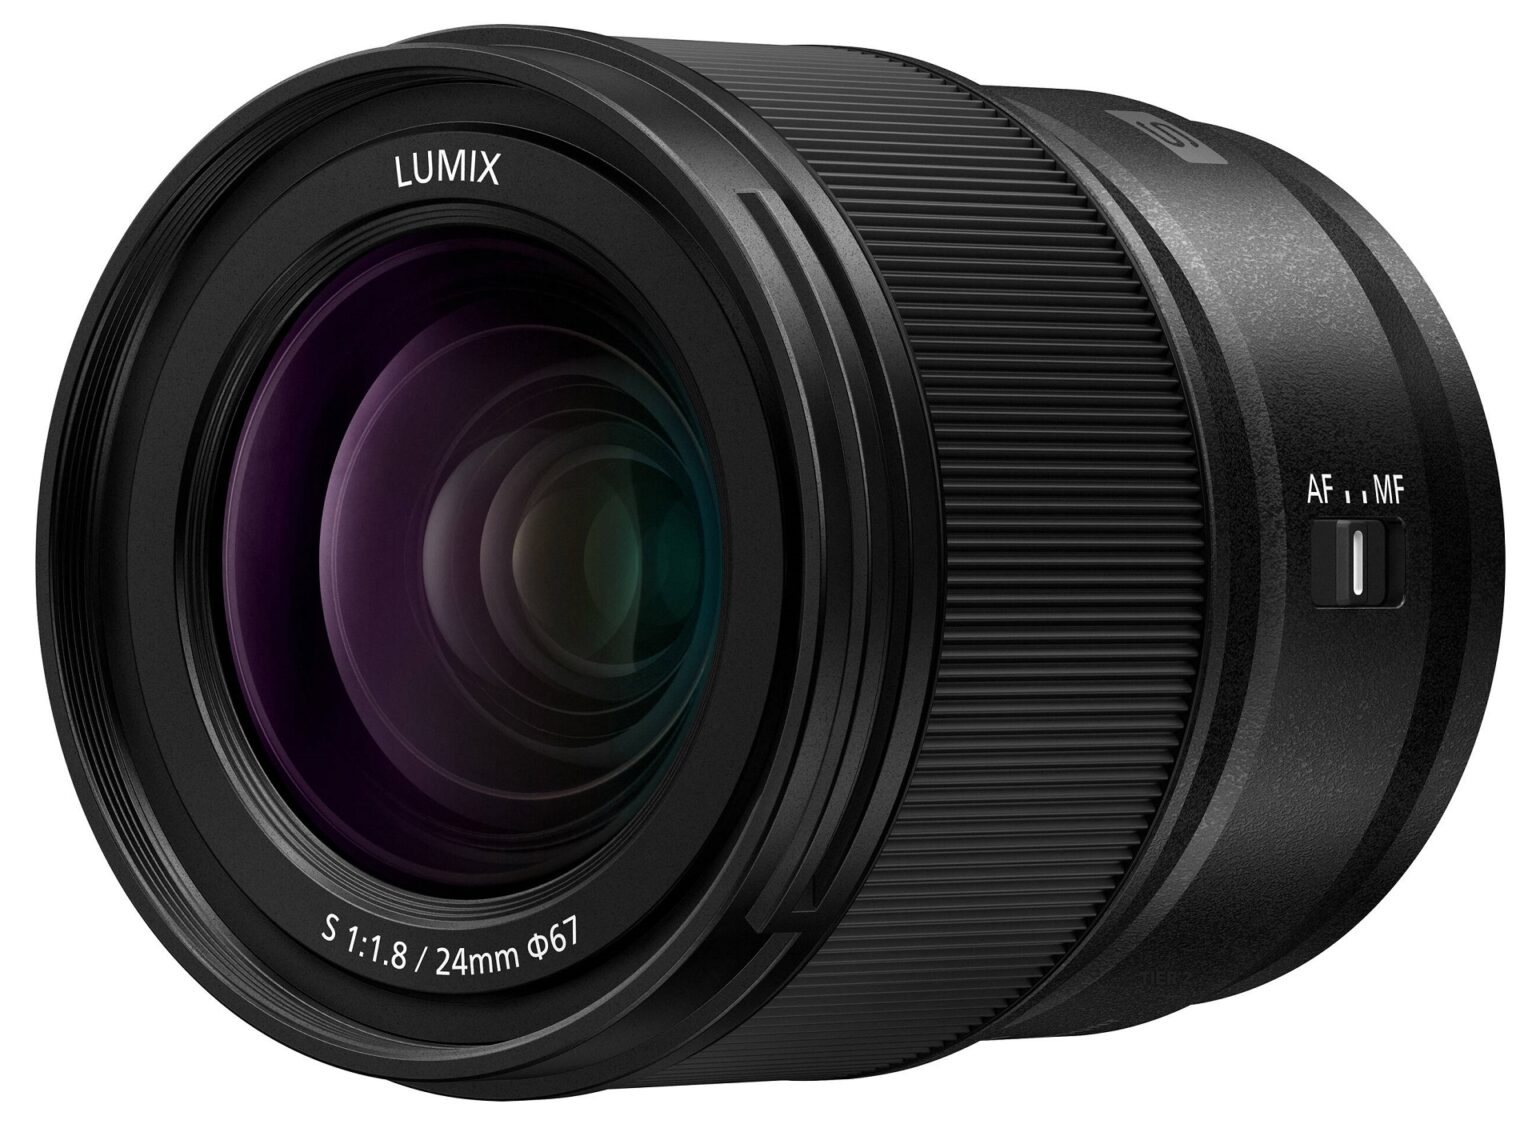 Panasonic LUMIX S 24mm f/1.8 Lens Launched | CineD